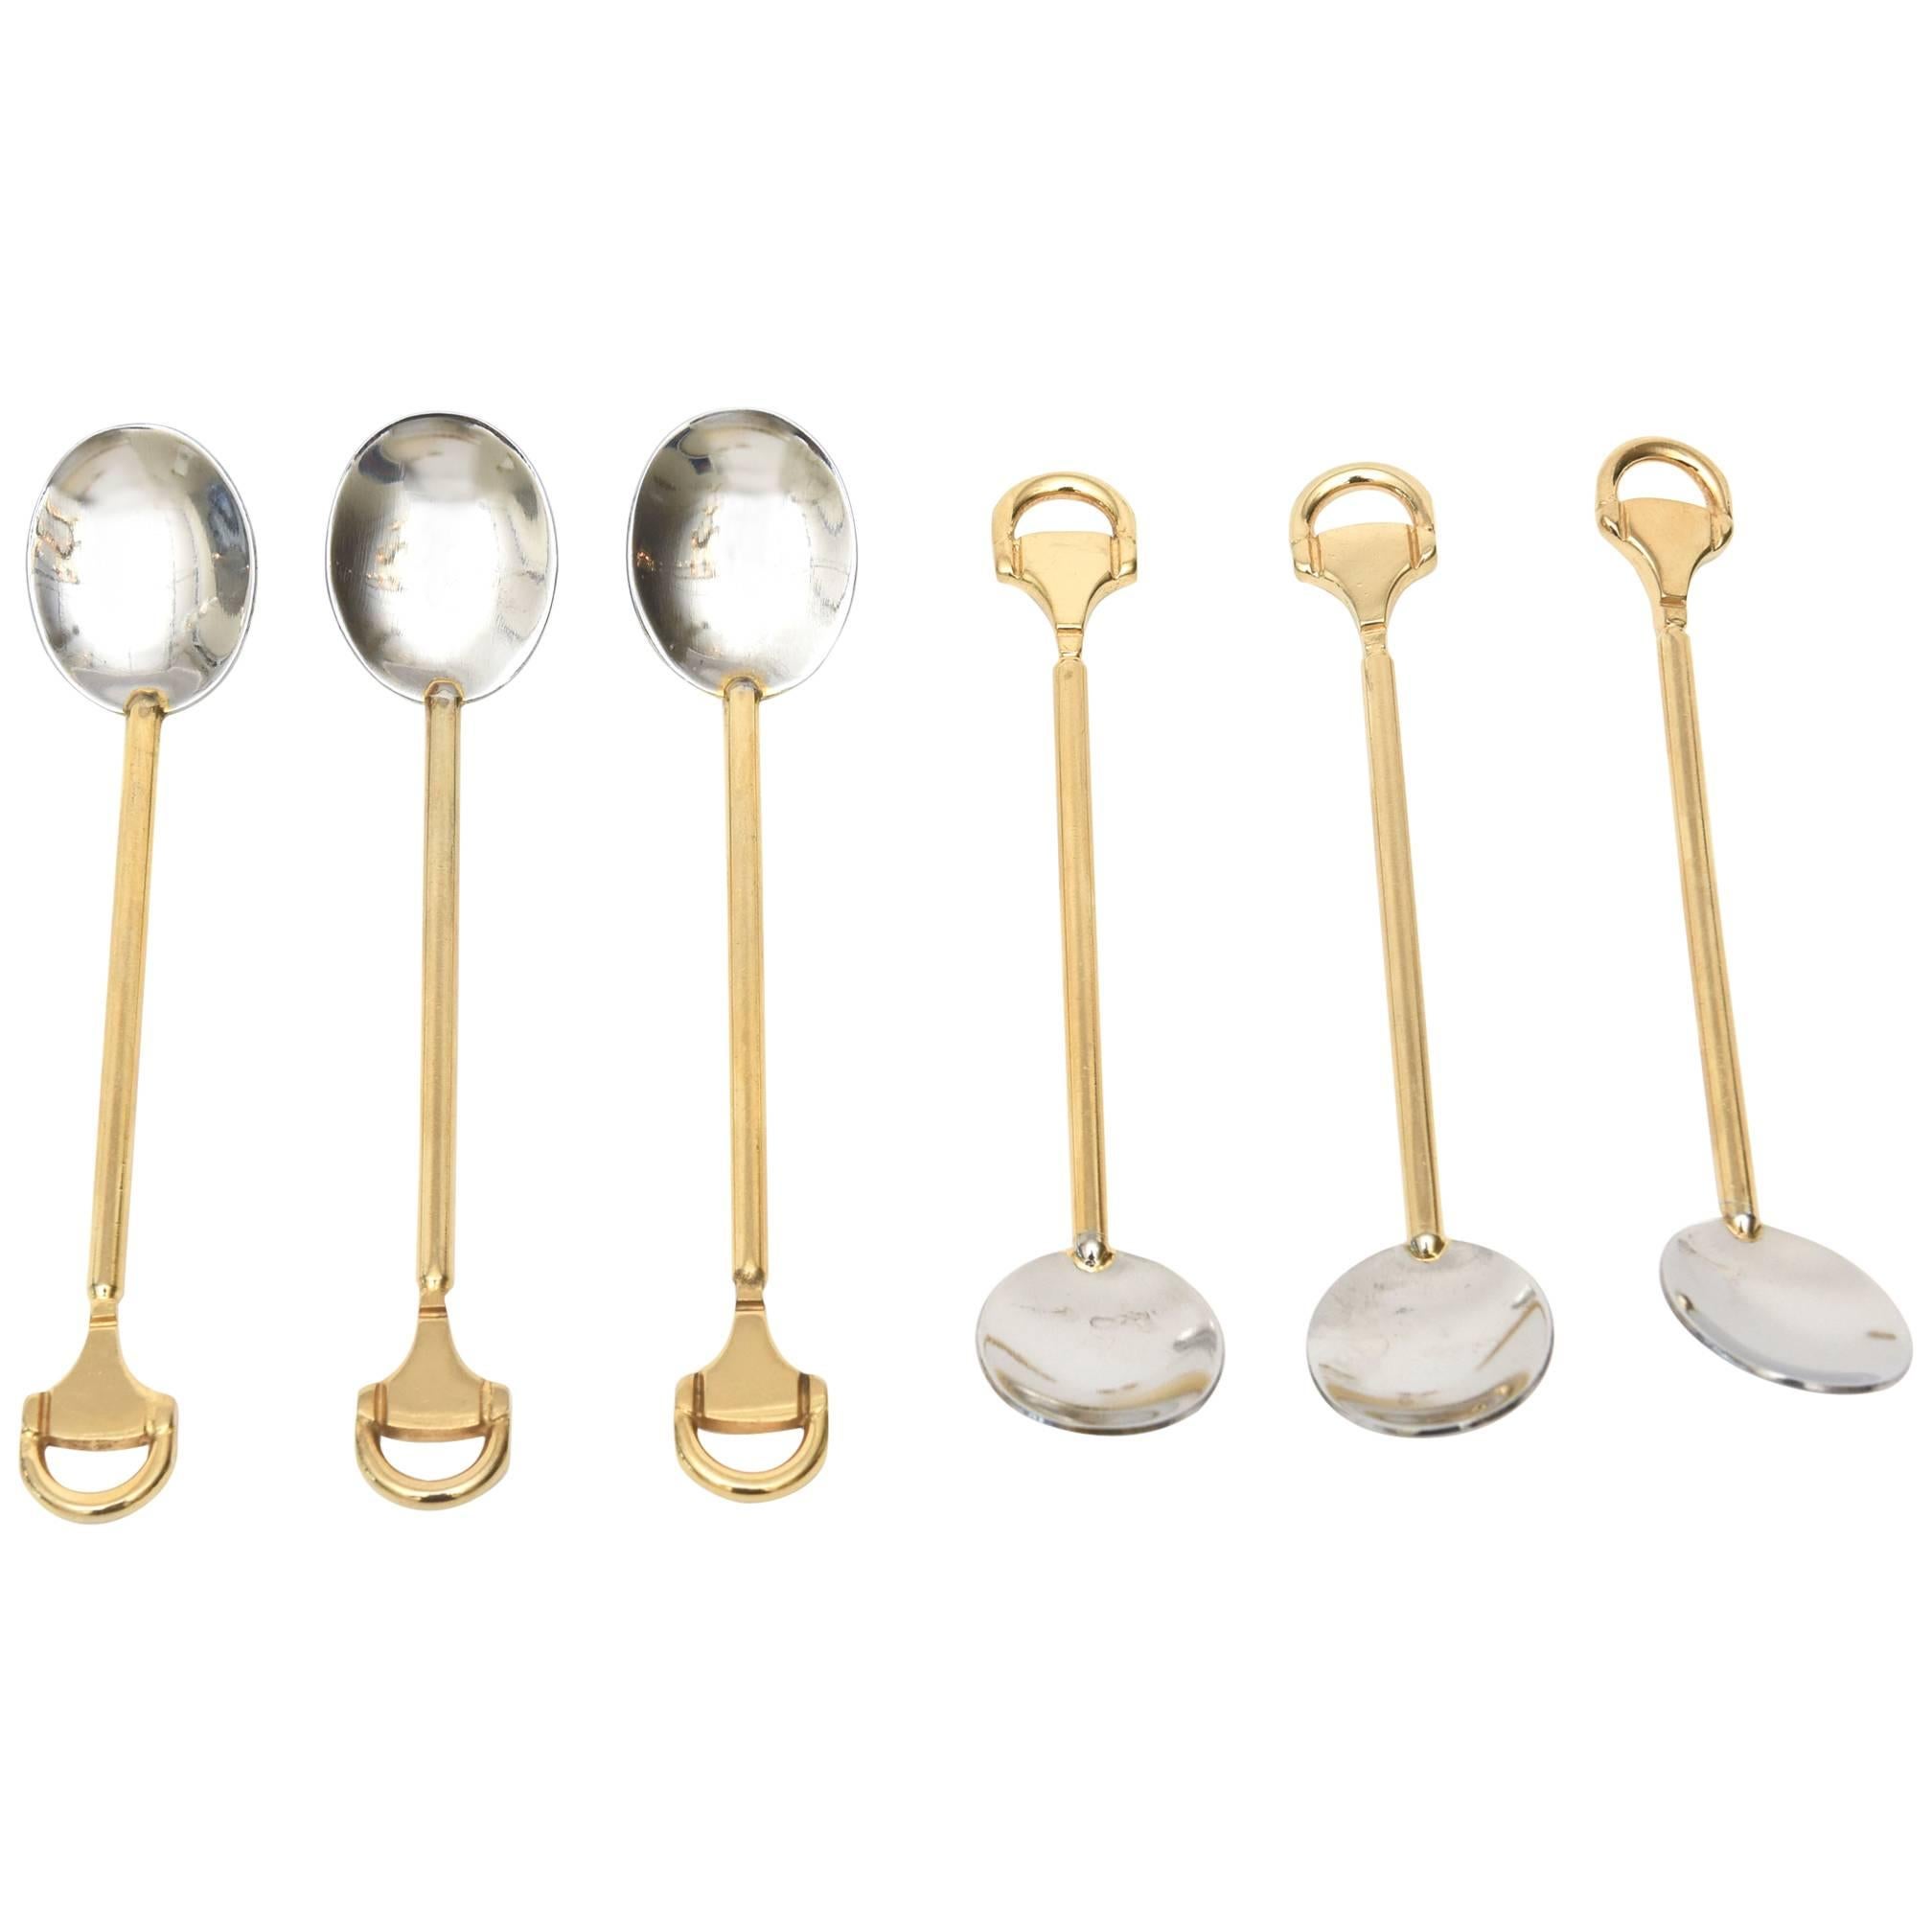 Set of 6 Italian Hallmarked Gucci Gold Plated/ Silver Demitasse Serving Spoons